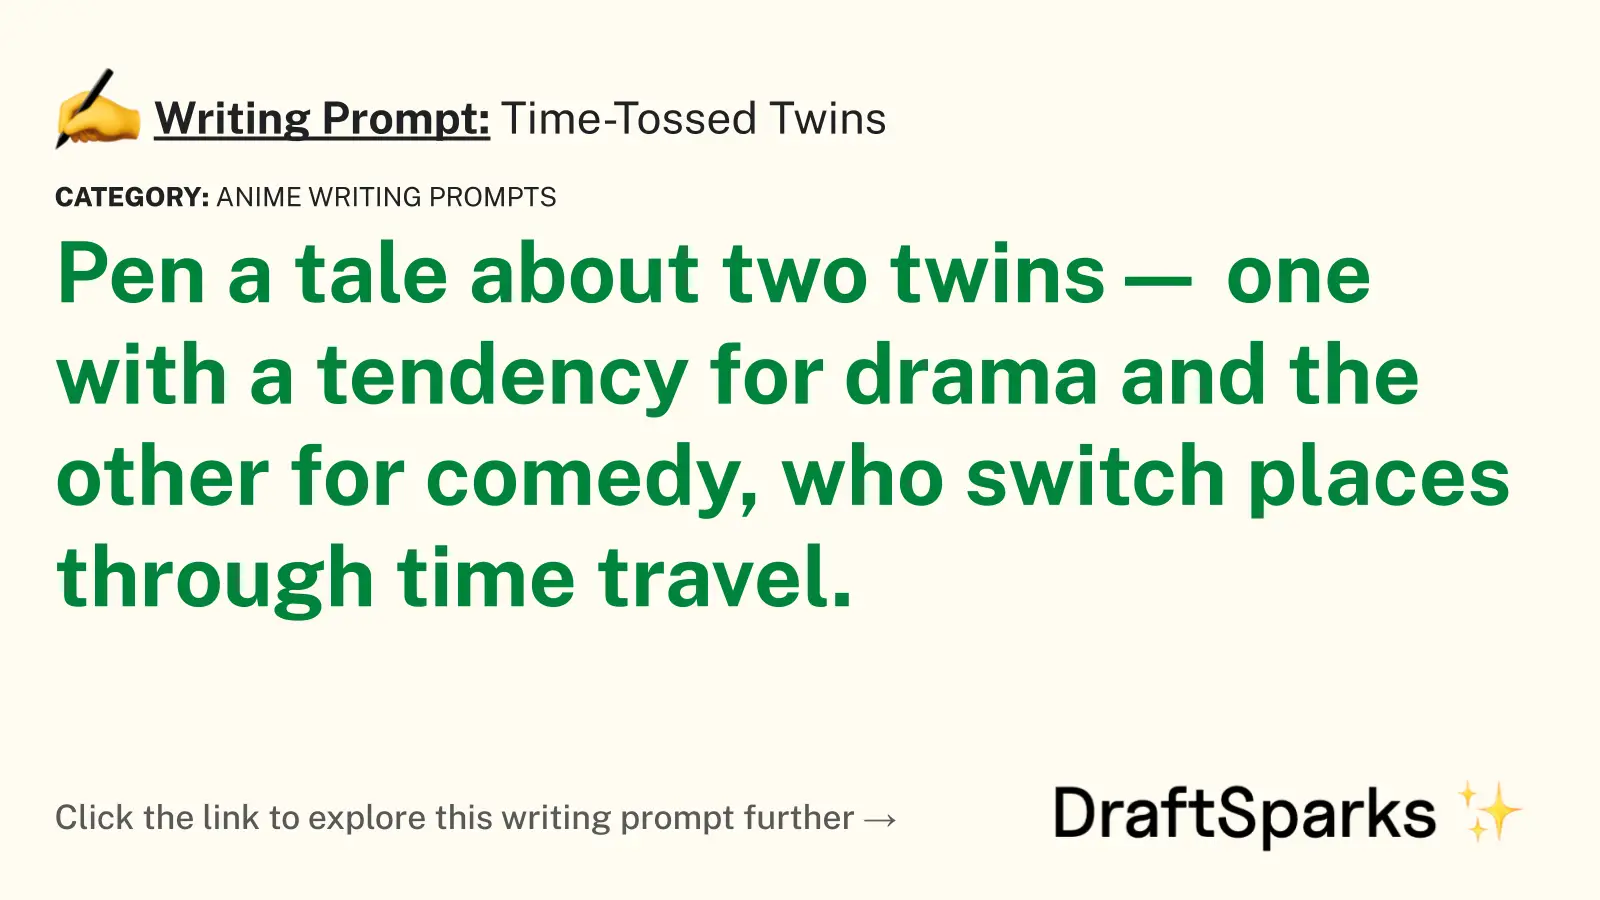 Time-Tossed Twins